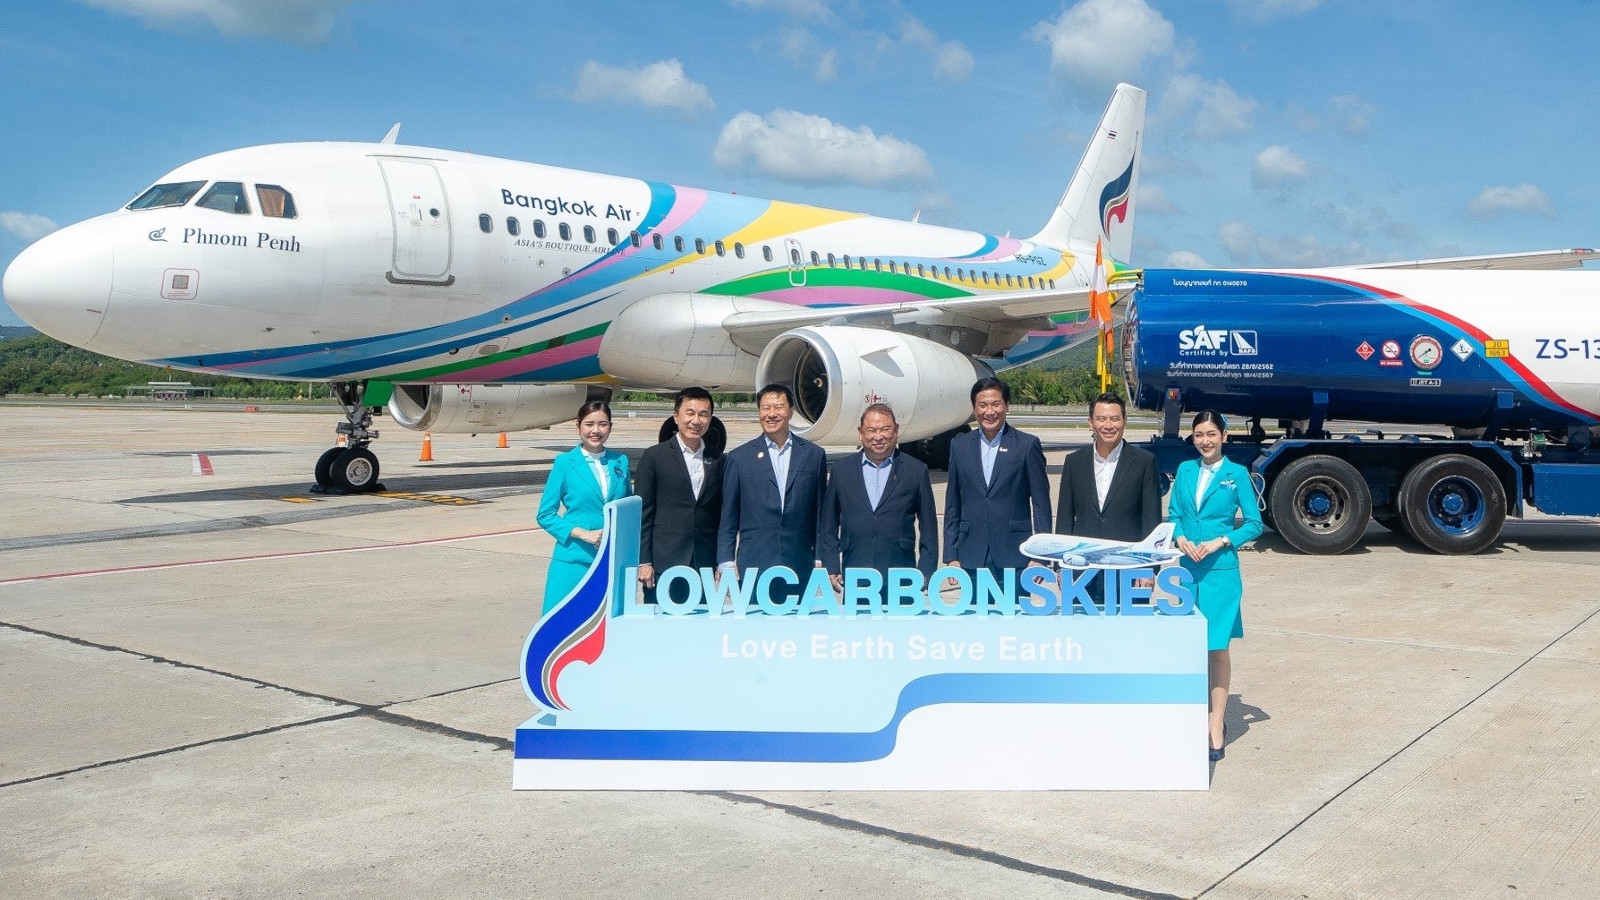 Bangkok Airways Launches “Low Carbon Skies” Campaign